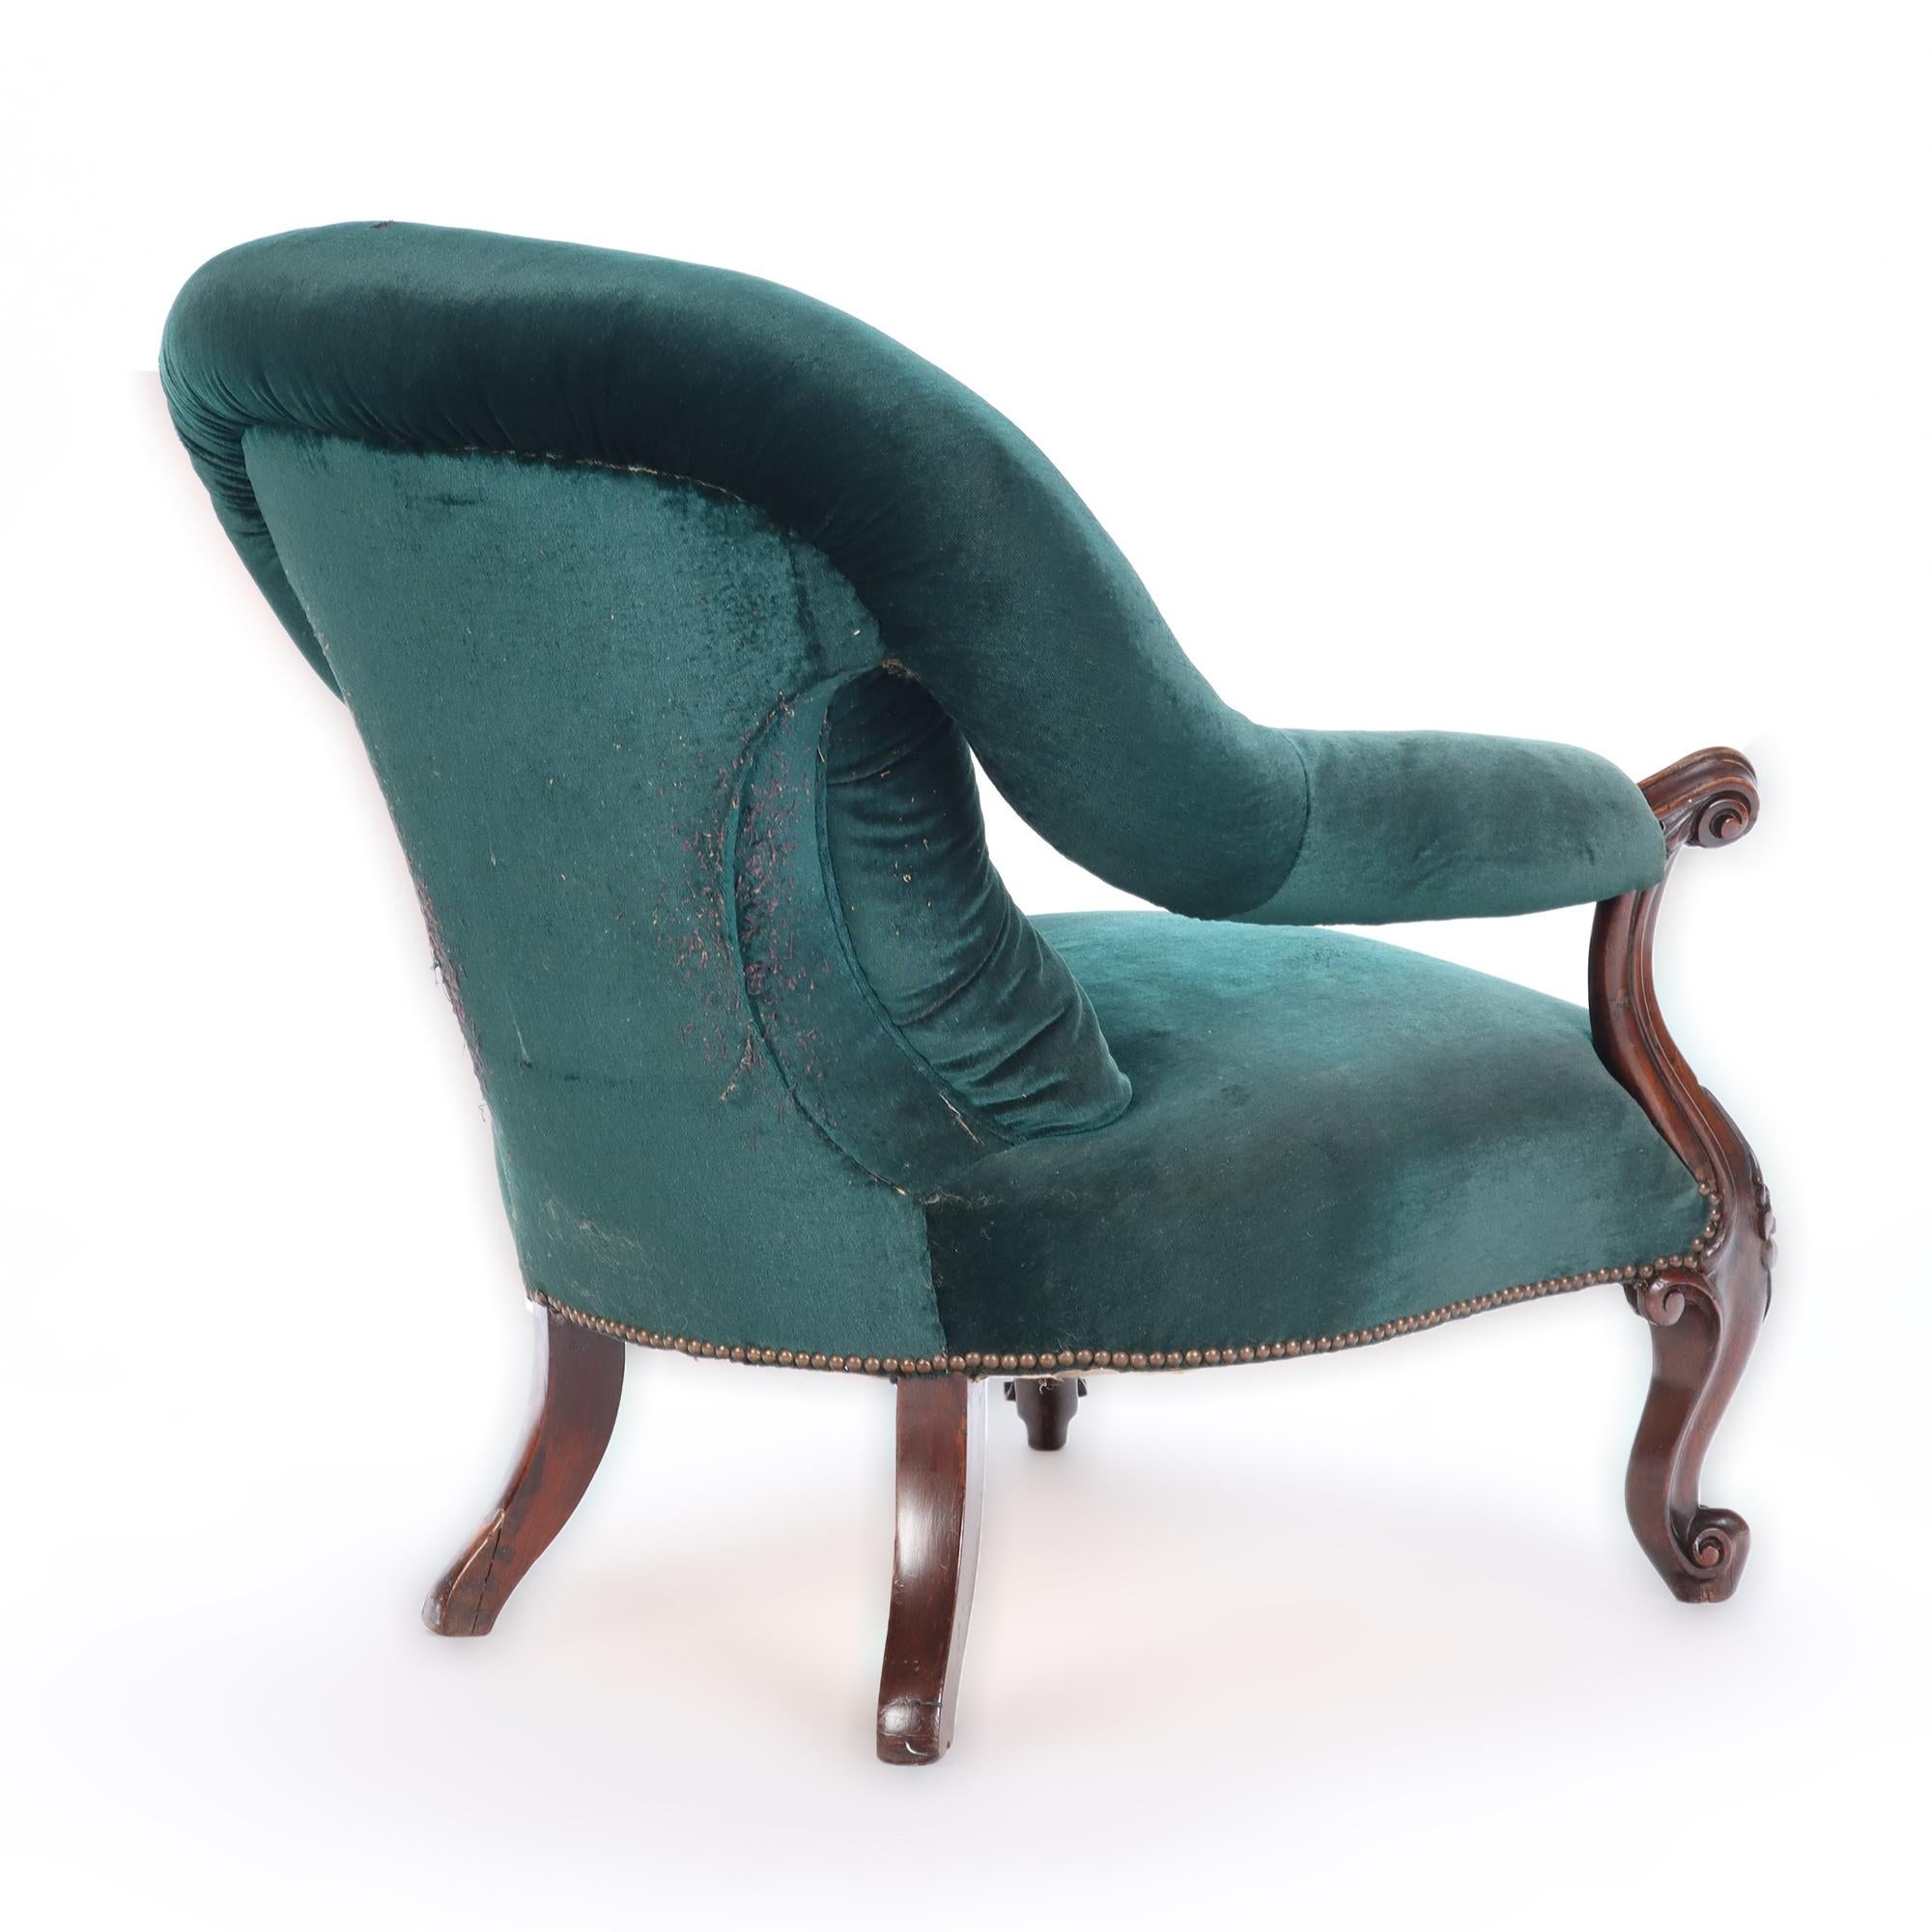 Imposing Velvet Upholstered Library Armchair with Continuous Arm, 19th C. For Sale 3